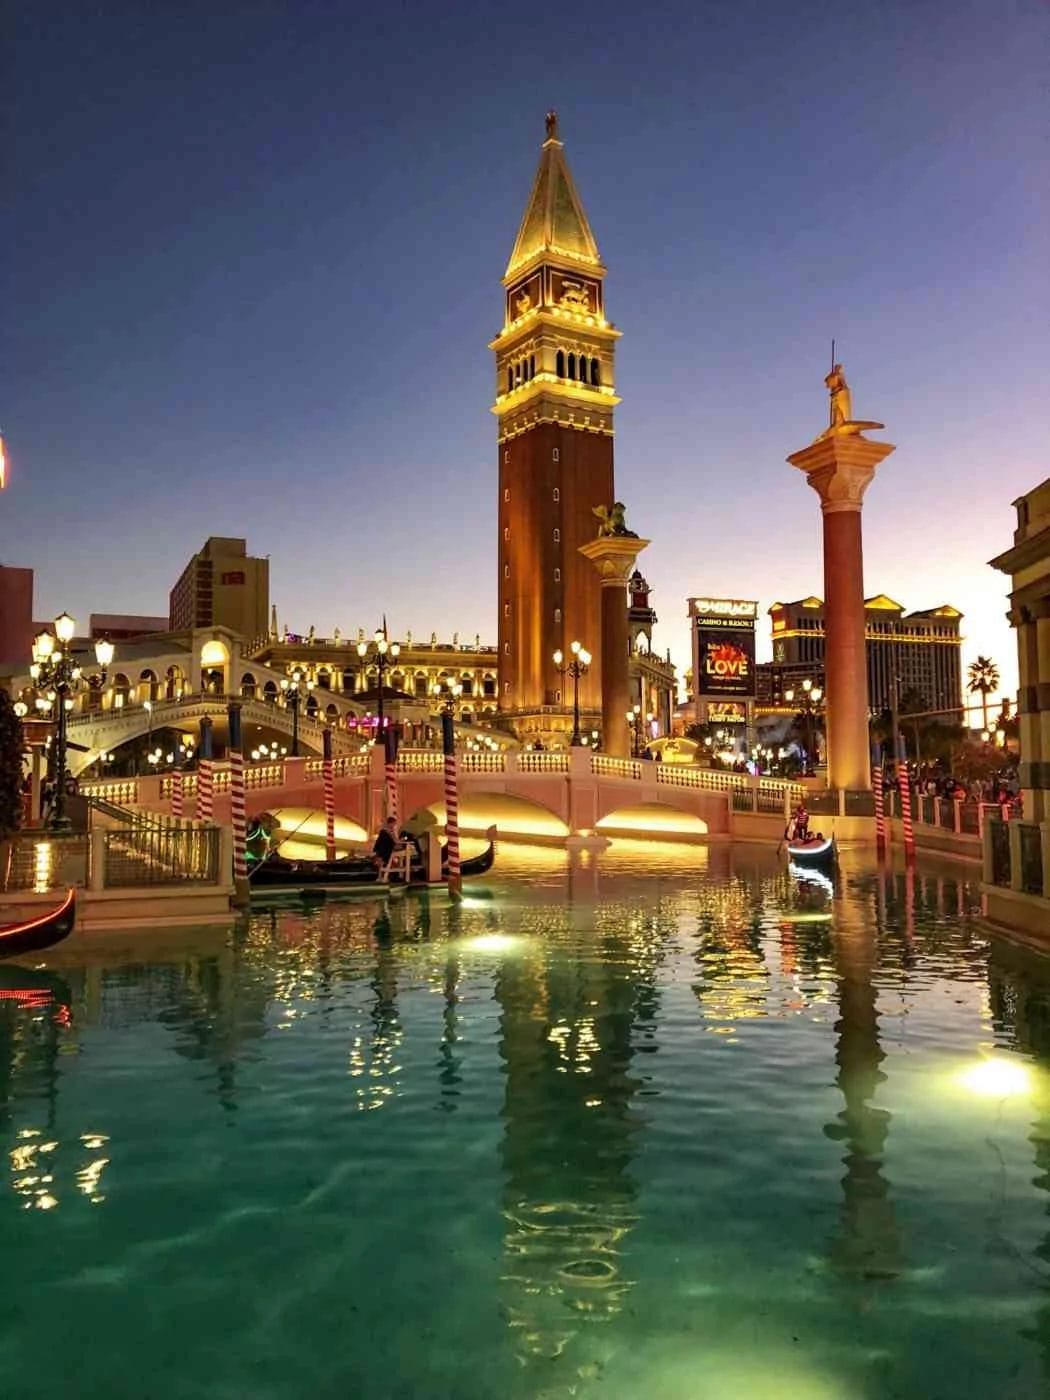 the venetian hotel and its saint mark's tower lit up at night in Las Vegas